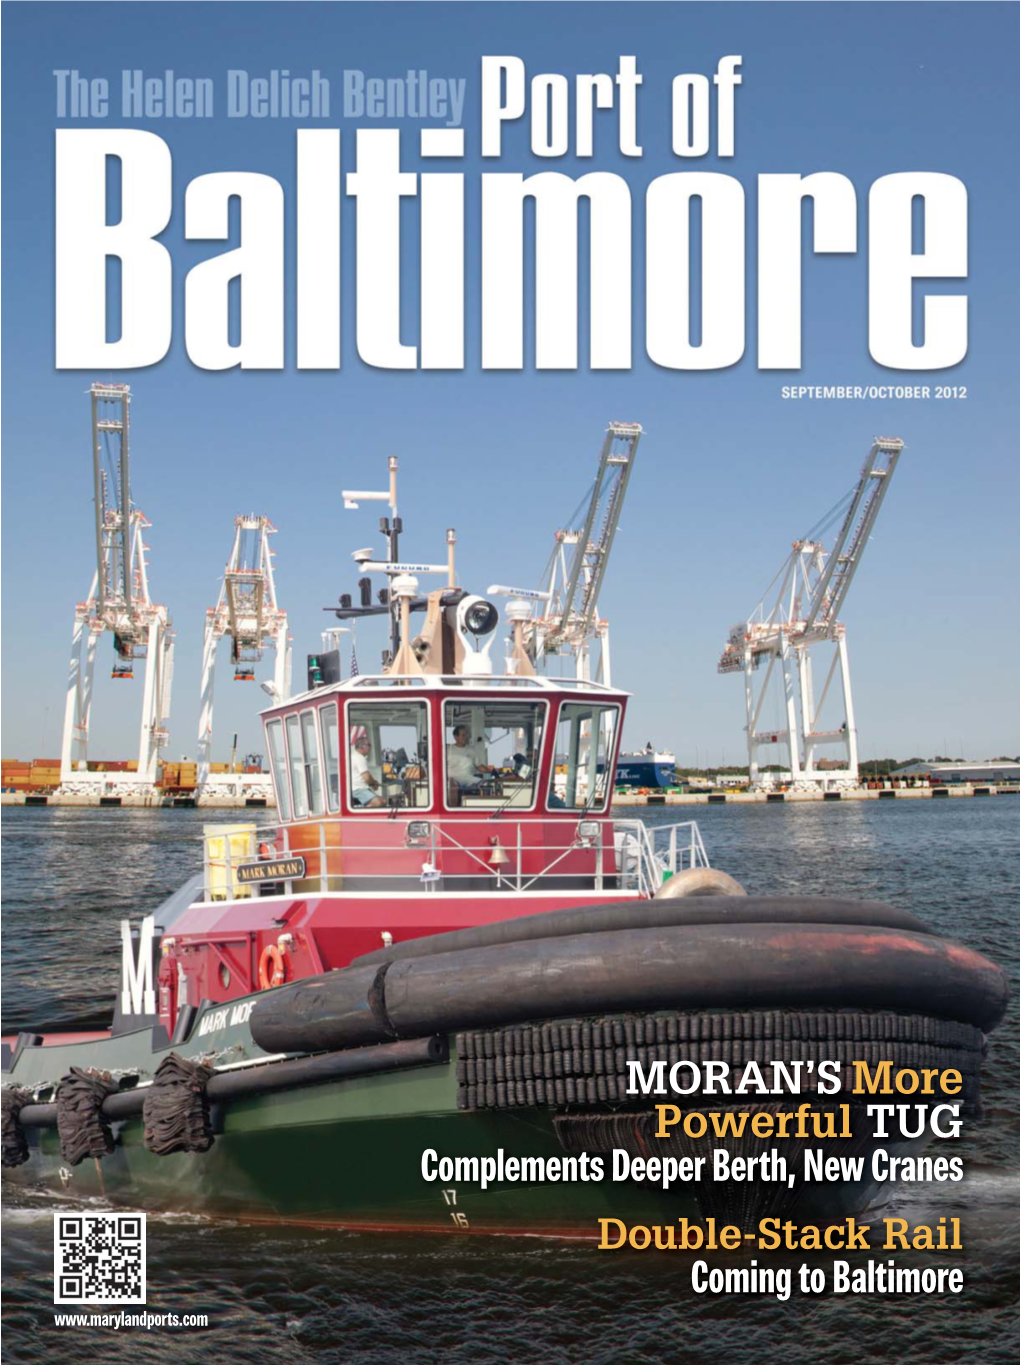 Complements Deeper Berth, New Cranes Coming to Baltimore